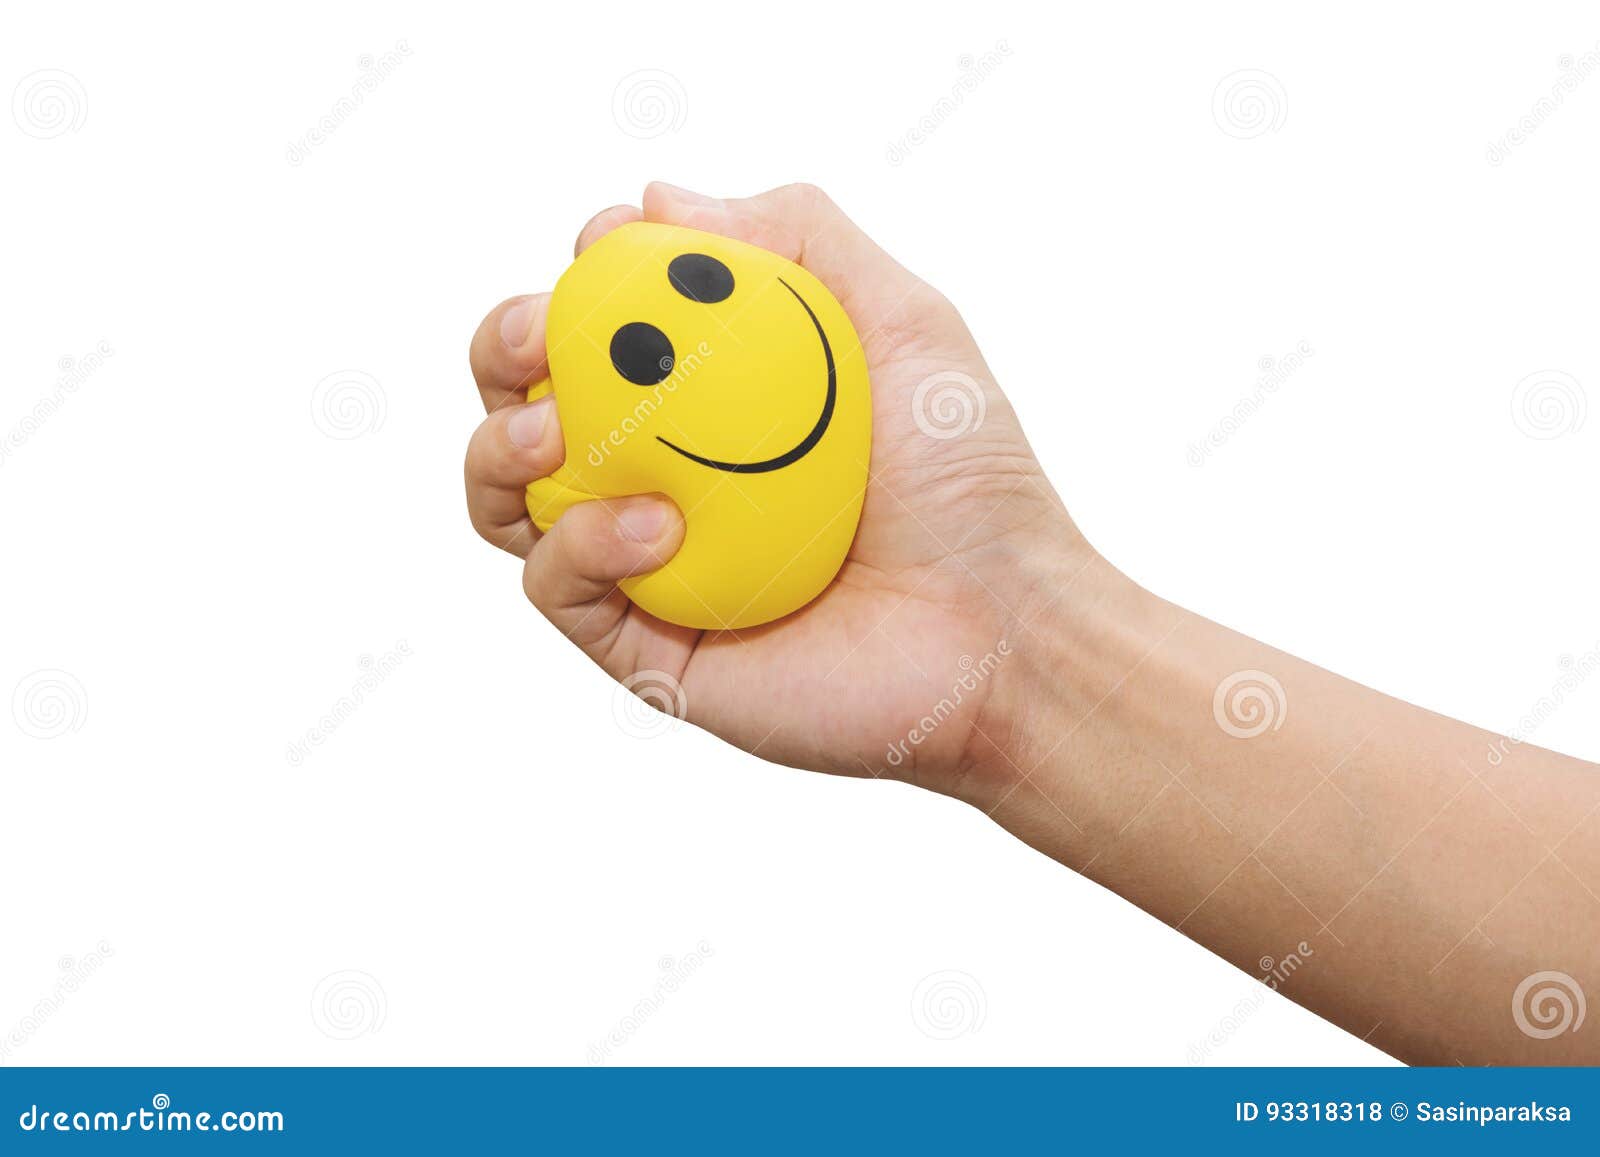 hand squeeze yellow stress ball,  on white background, anger management, positive thinking 